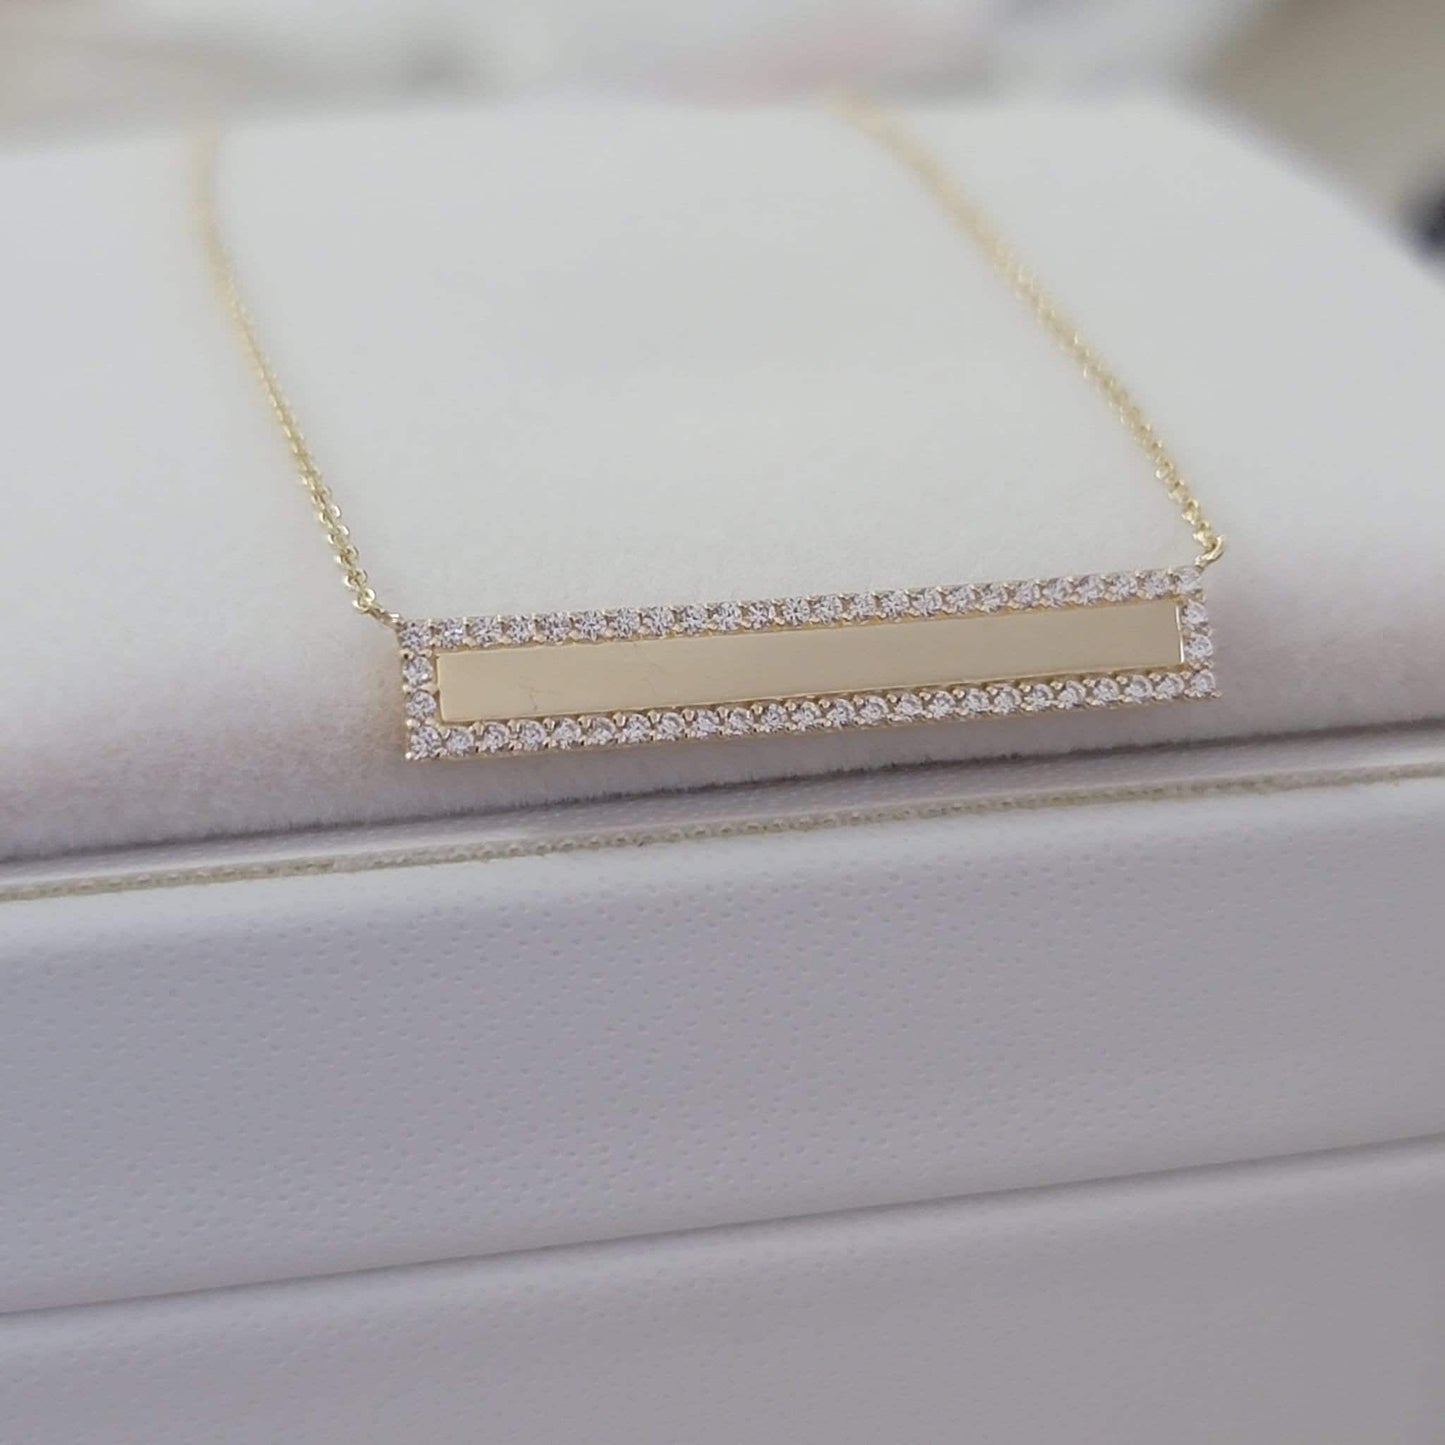 Diamond Bar Necklace, 14k Solid Gold Diamond Bar Necklace with Micro Pave Setting, Diamond Bar Trapeze Necklace, Layering Bar Necklace, Rose